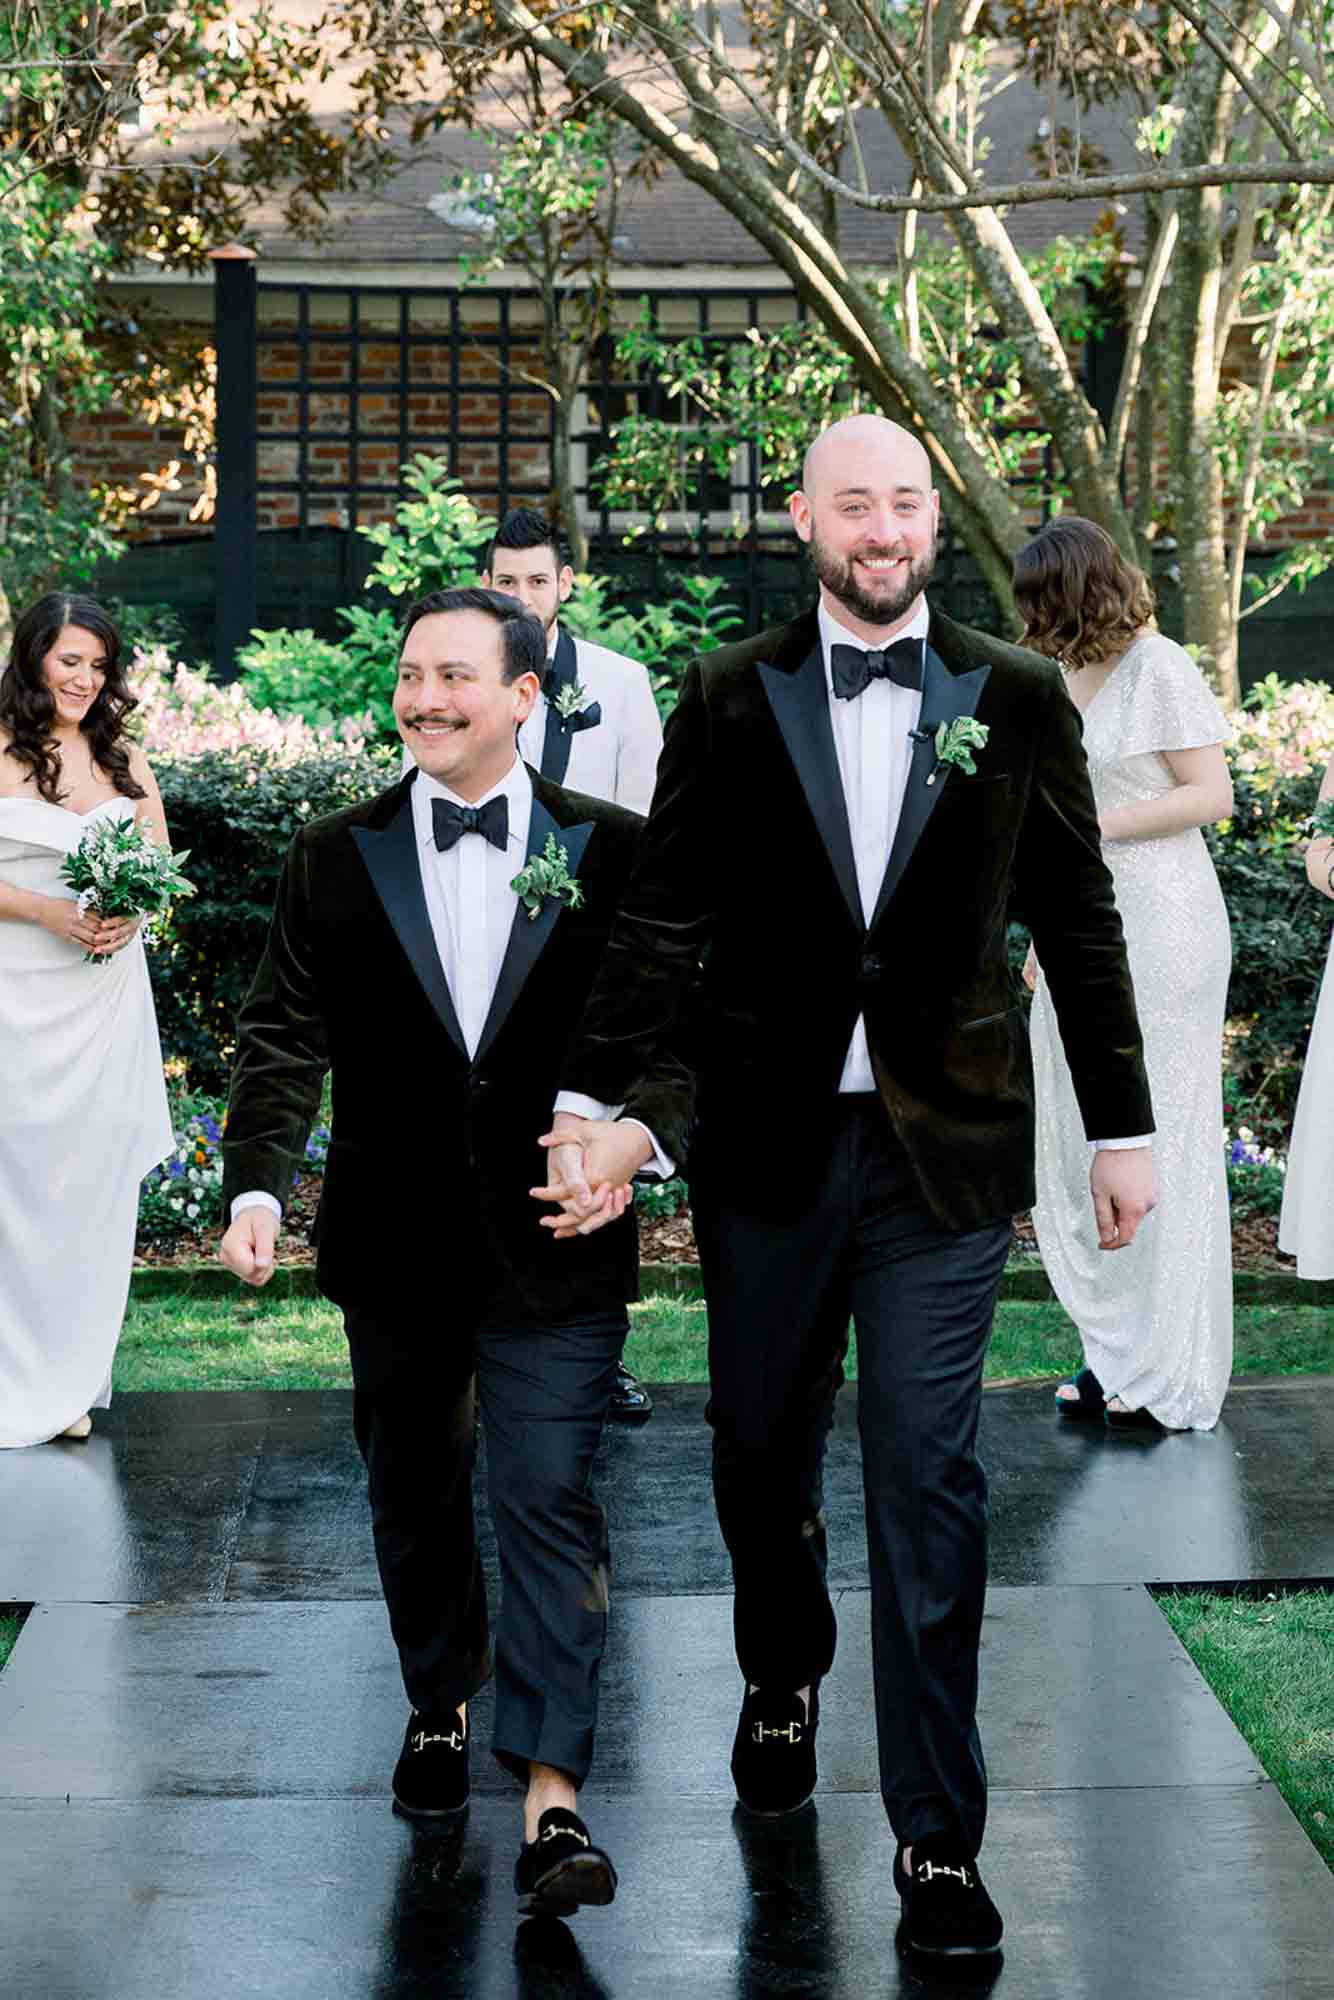 The guests wore white at this South Carolina wedding | Cameron Hinkle Photography | Featured on Equally Wed, the leading LGBTQ+ wedding magazine